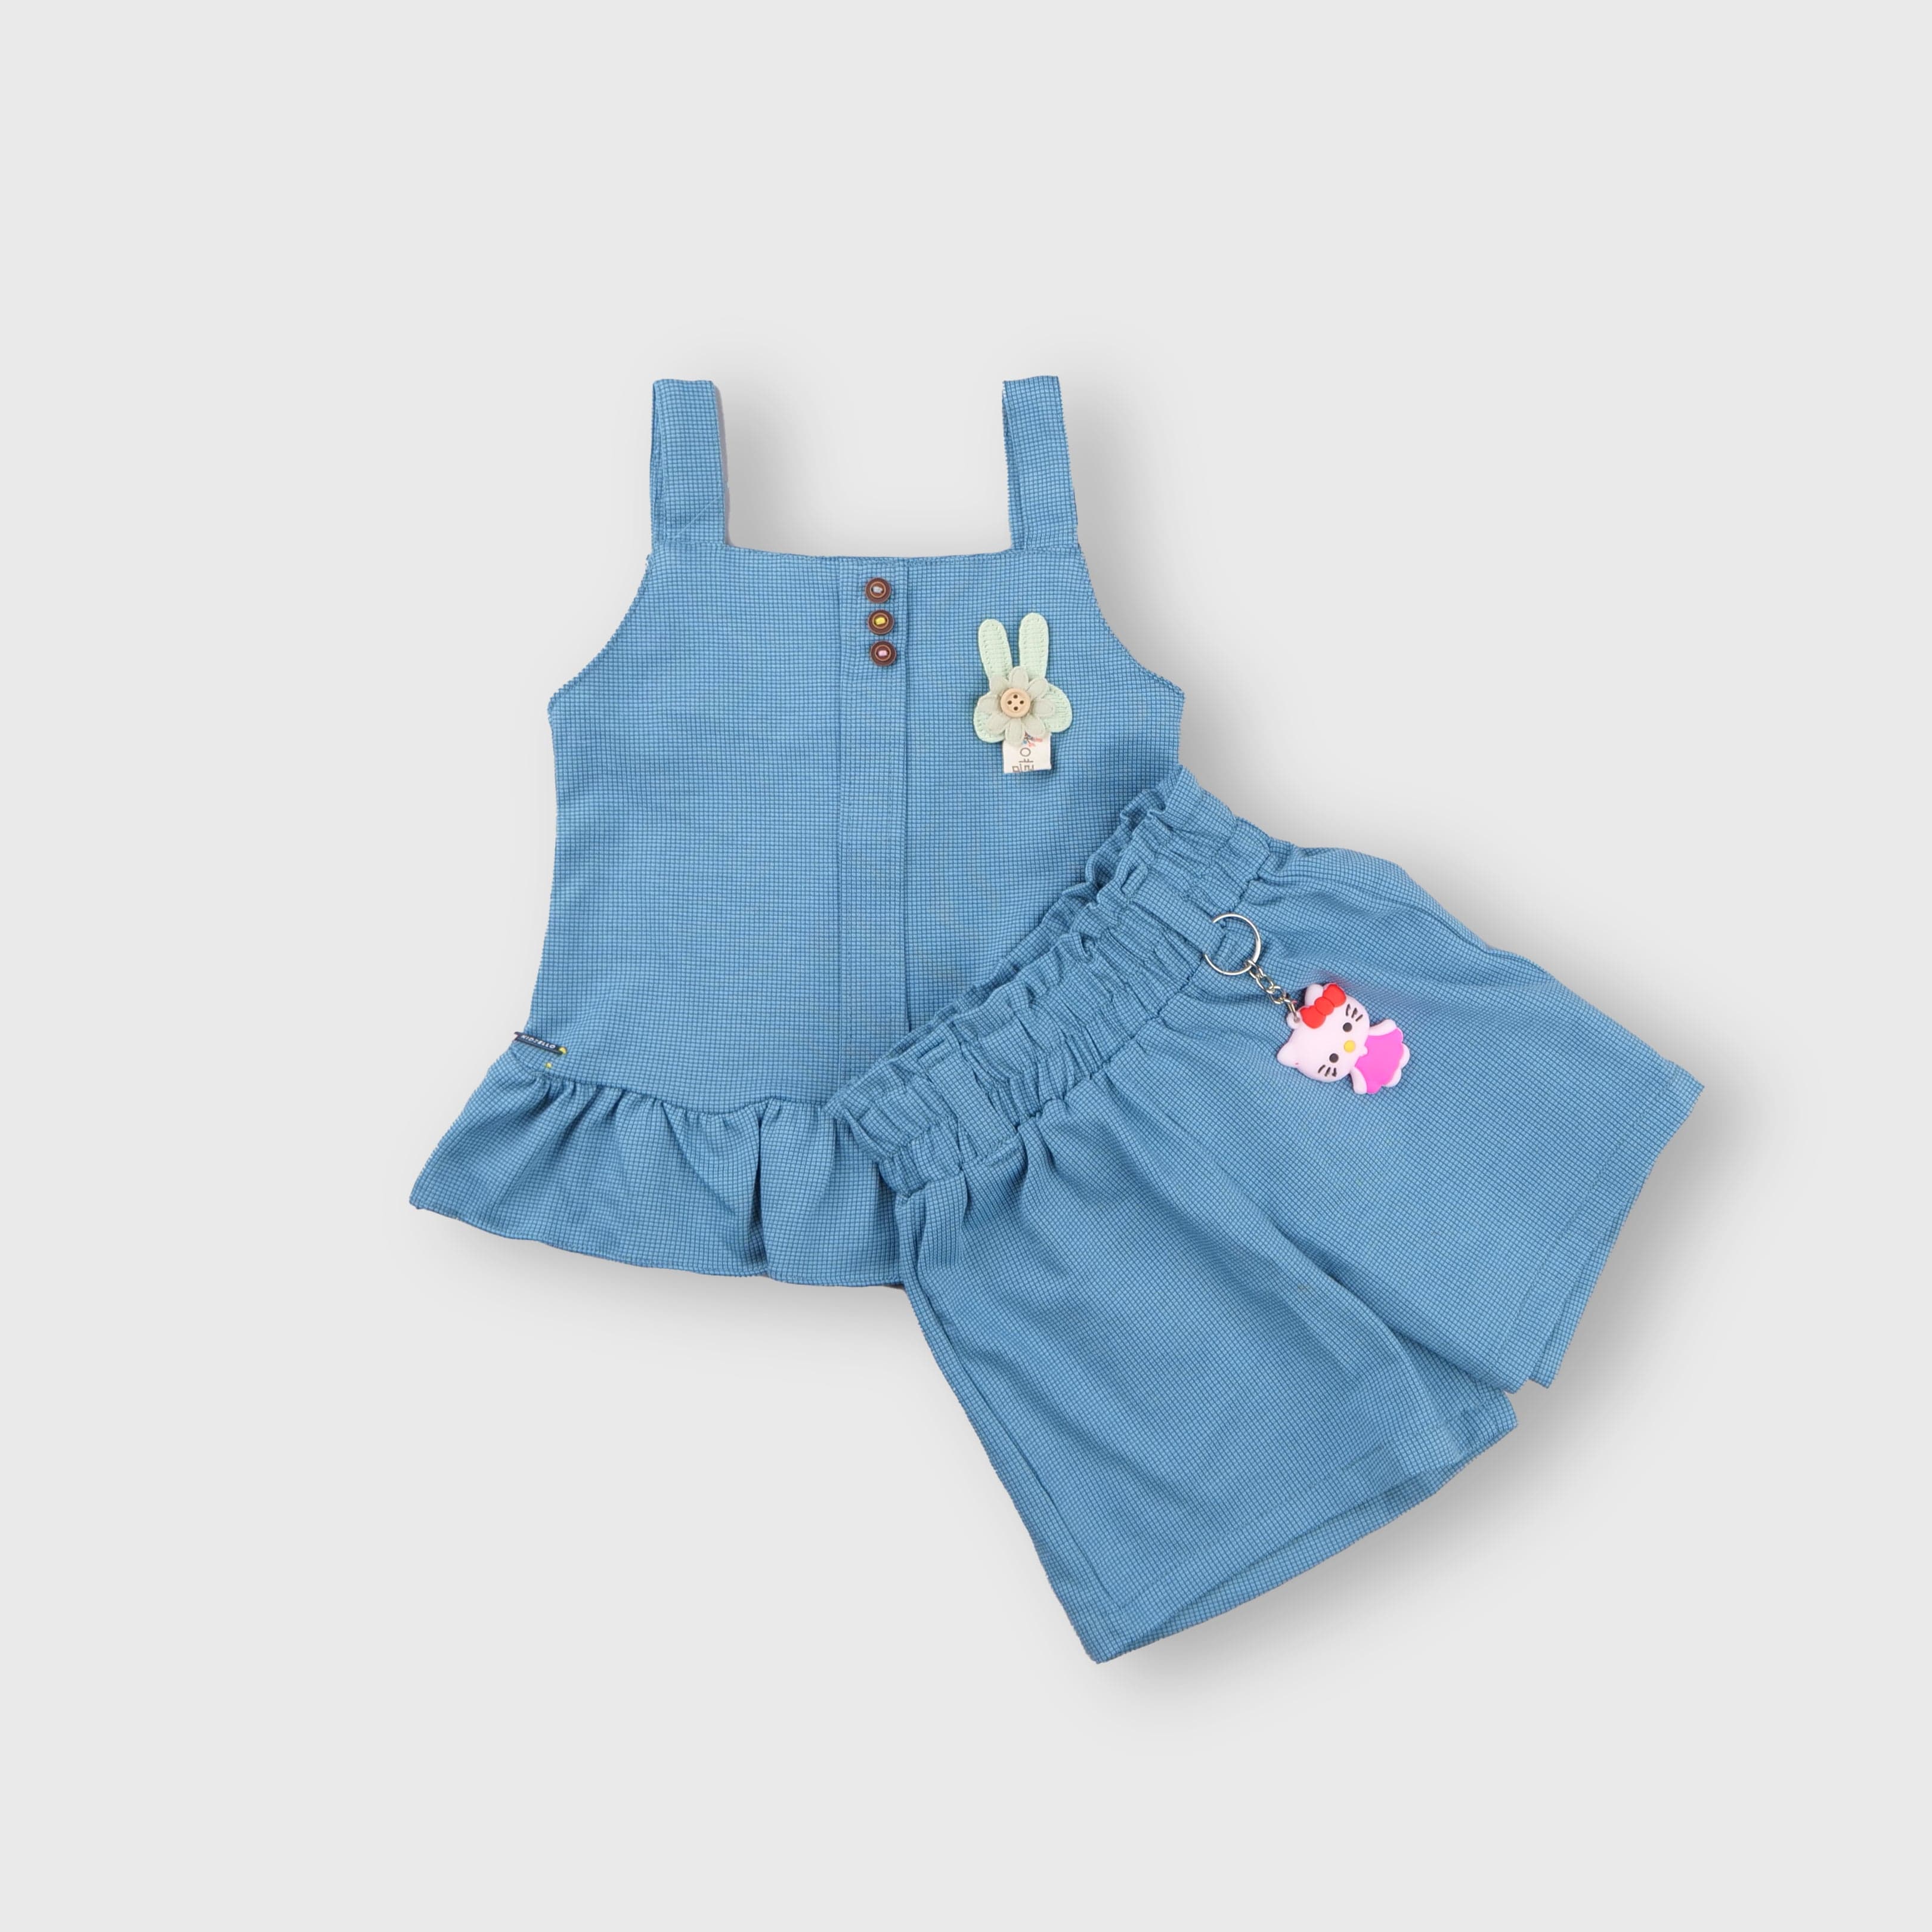 What Clothes Do I Need for a Newborn Girl? – Baby Beau and Belle